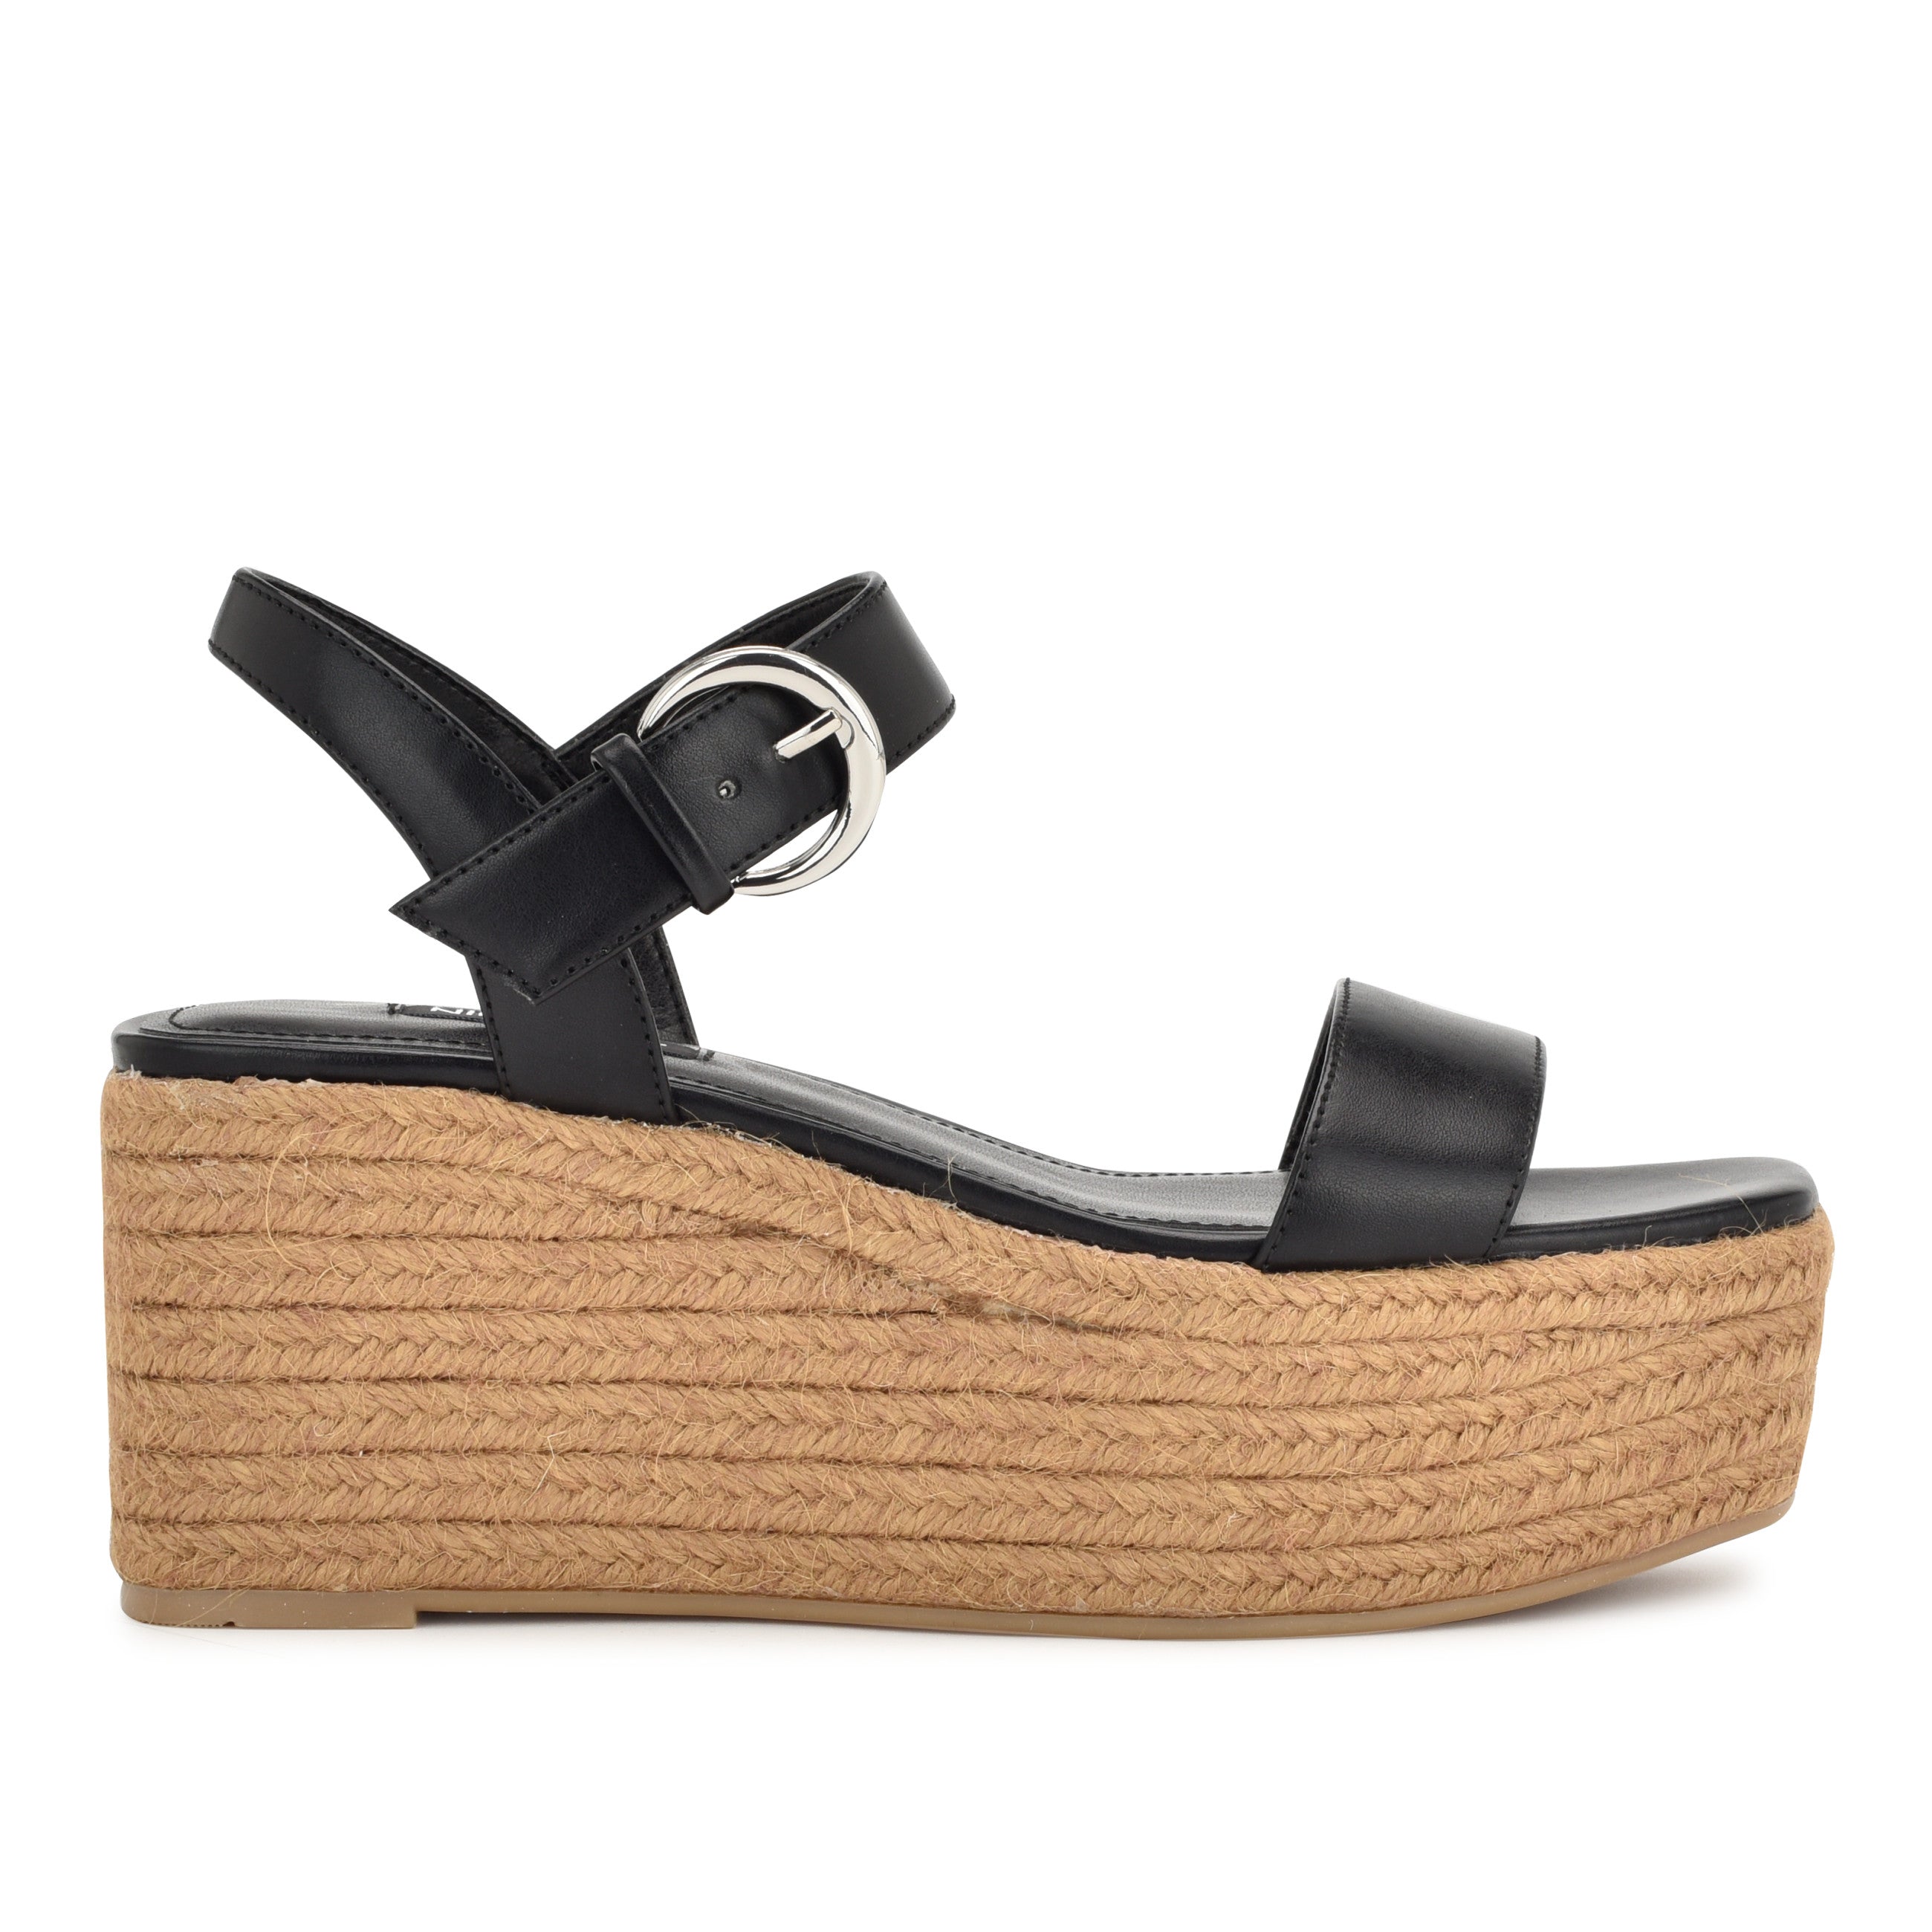 Clearance | Nine West comfortable and fashionable shoes and handbags ...